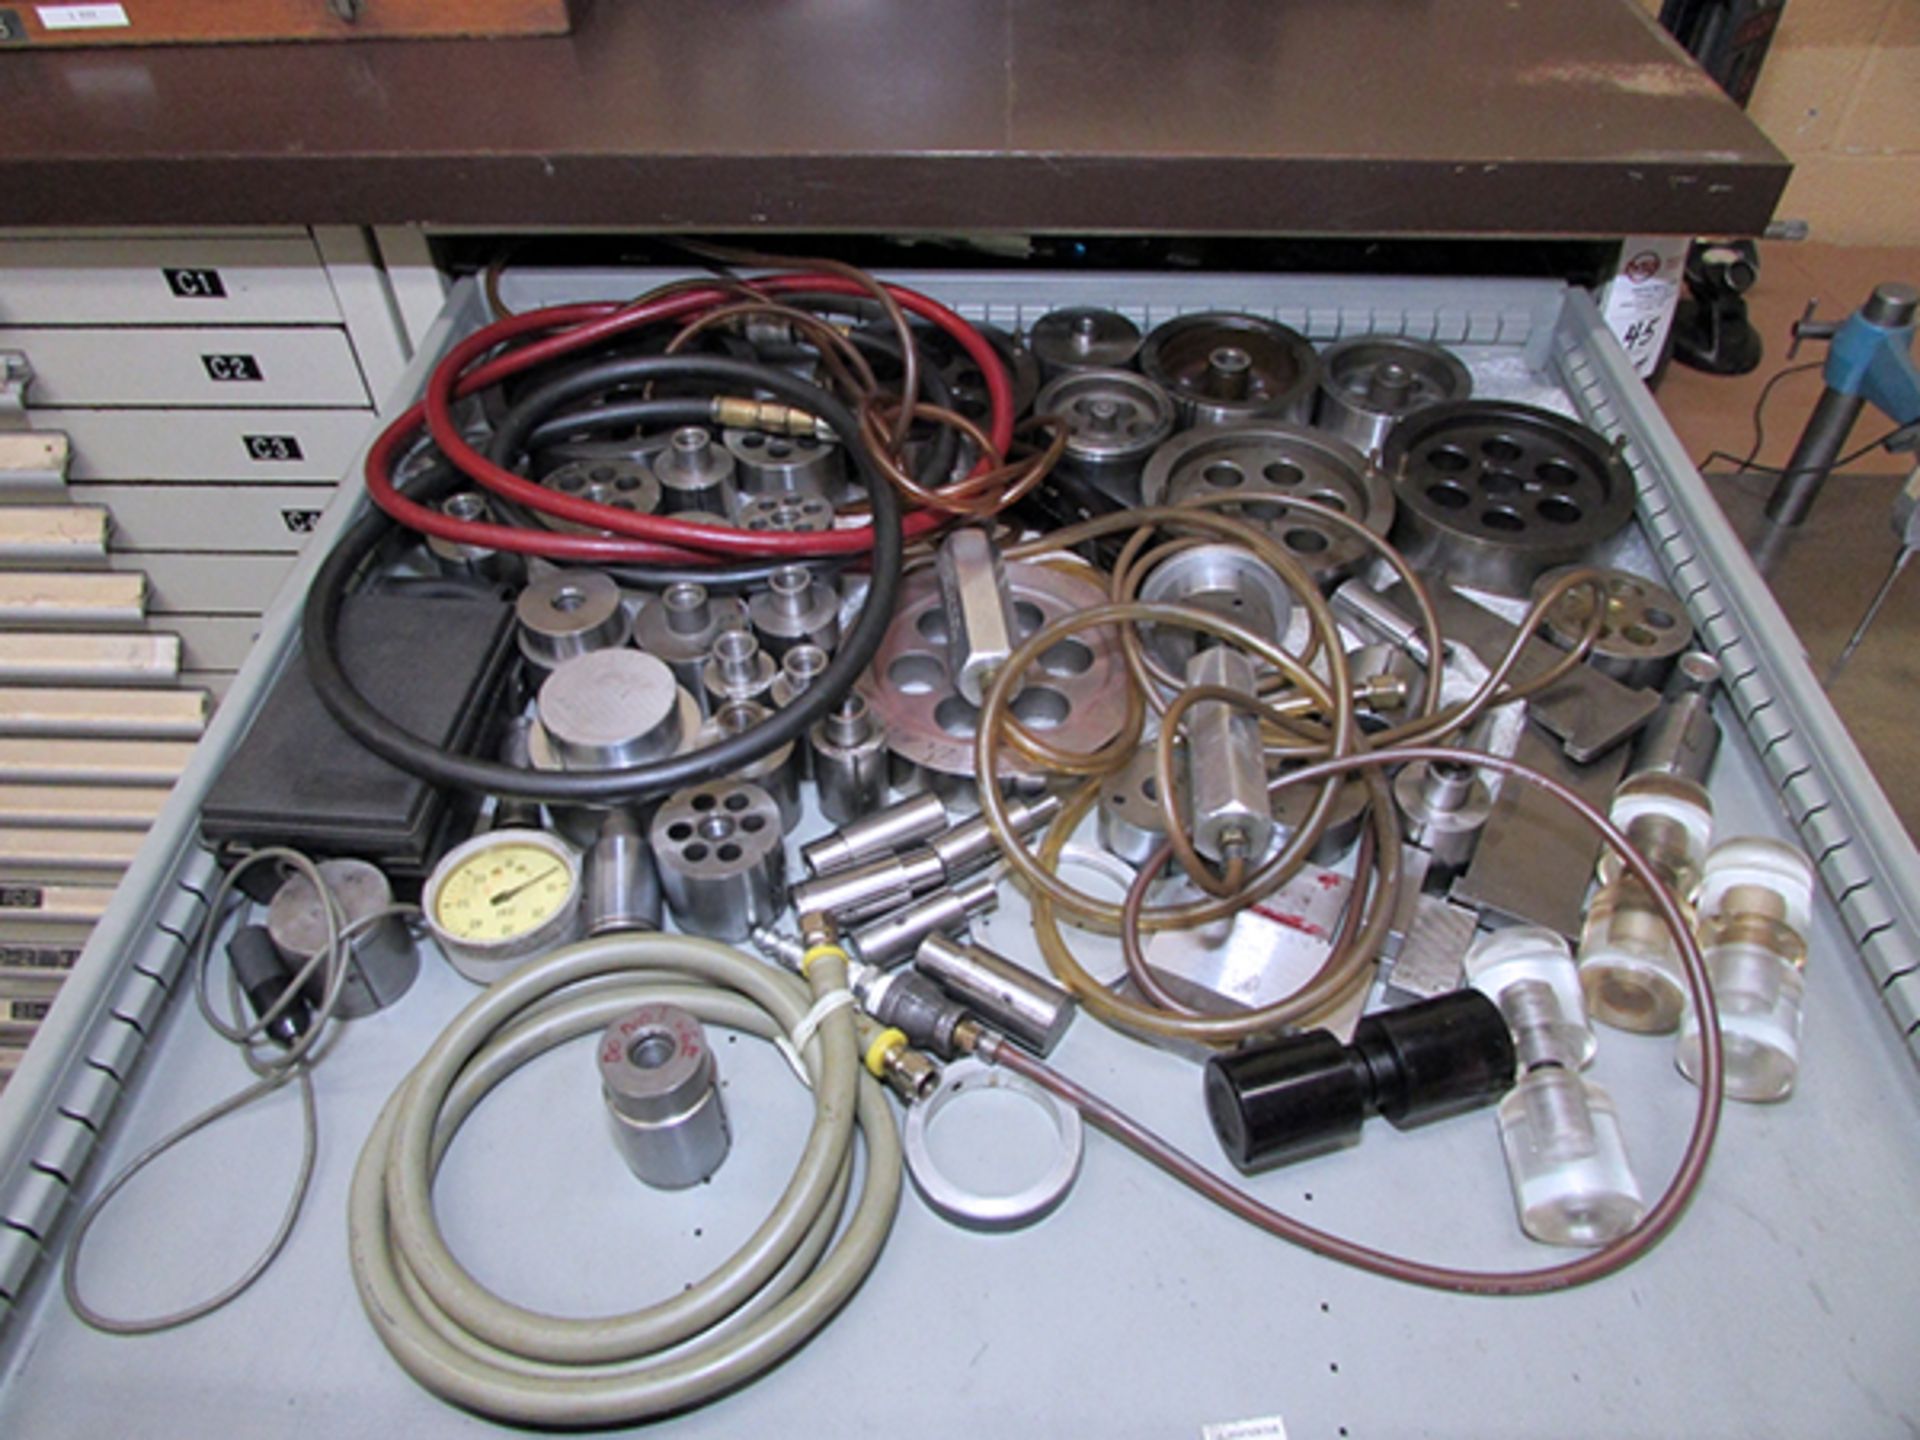 Contents of 7 Cabinet Drawers